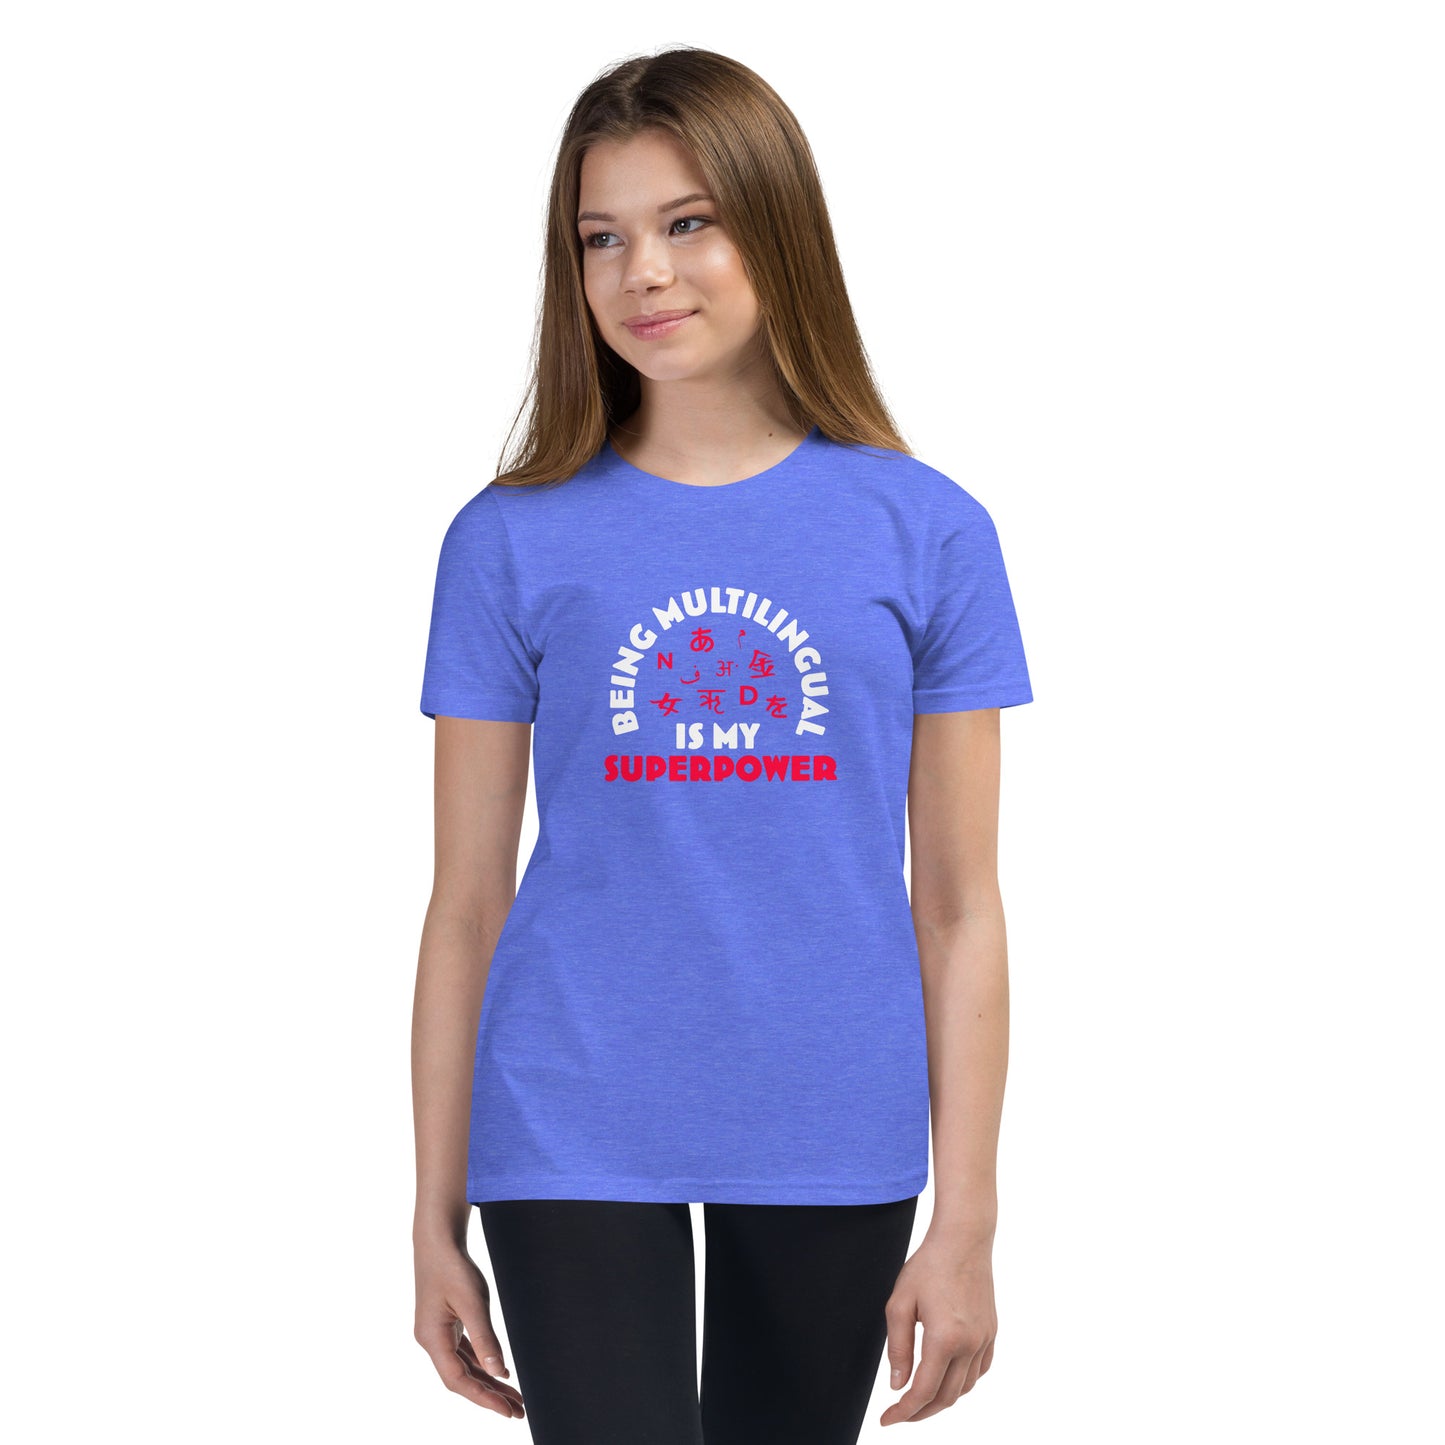 Multilingual Superpower Youth Short T-Shirt